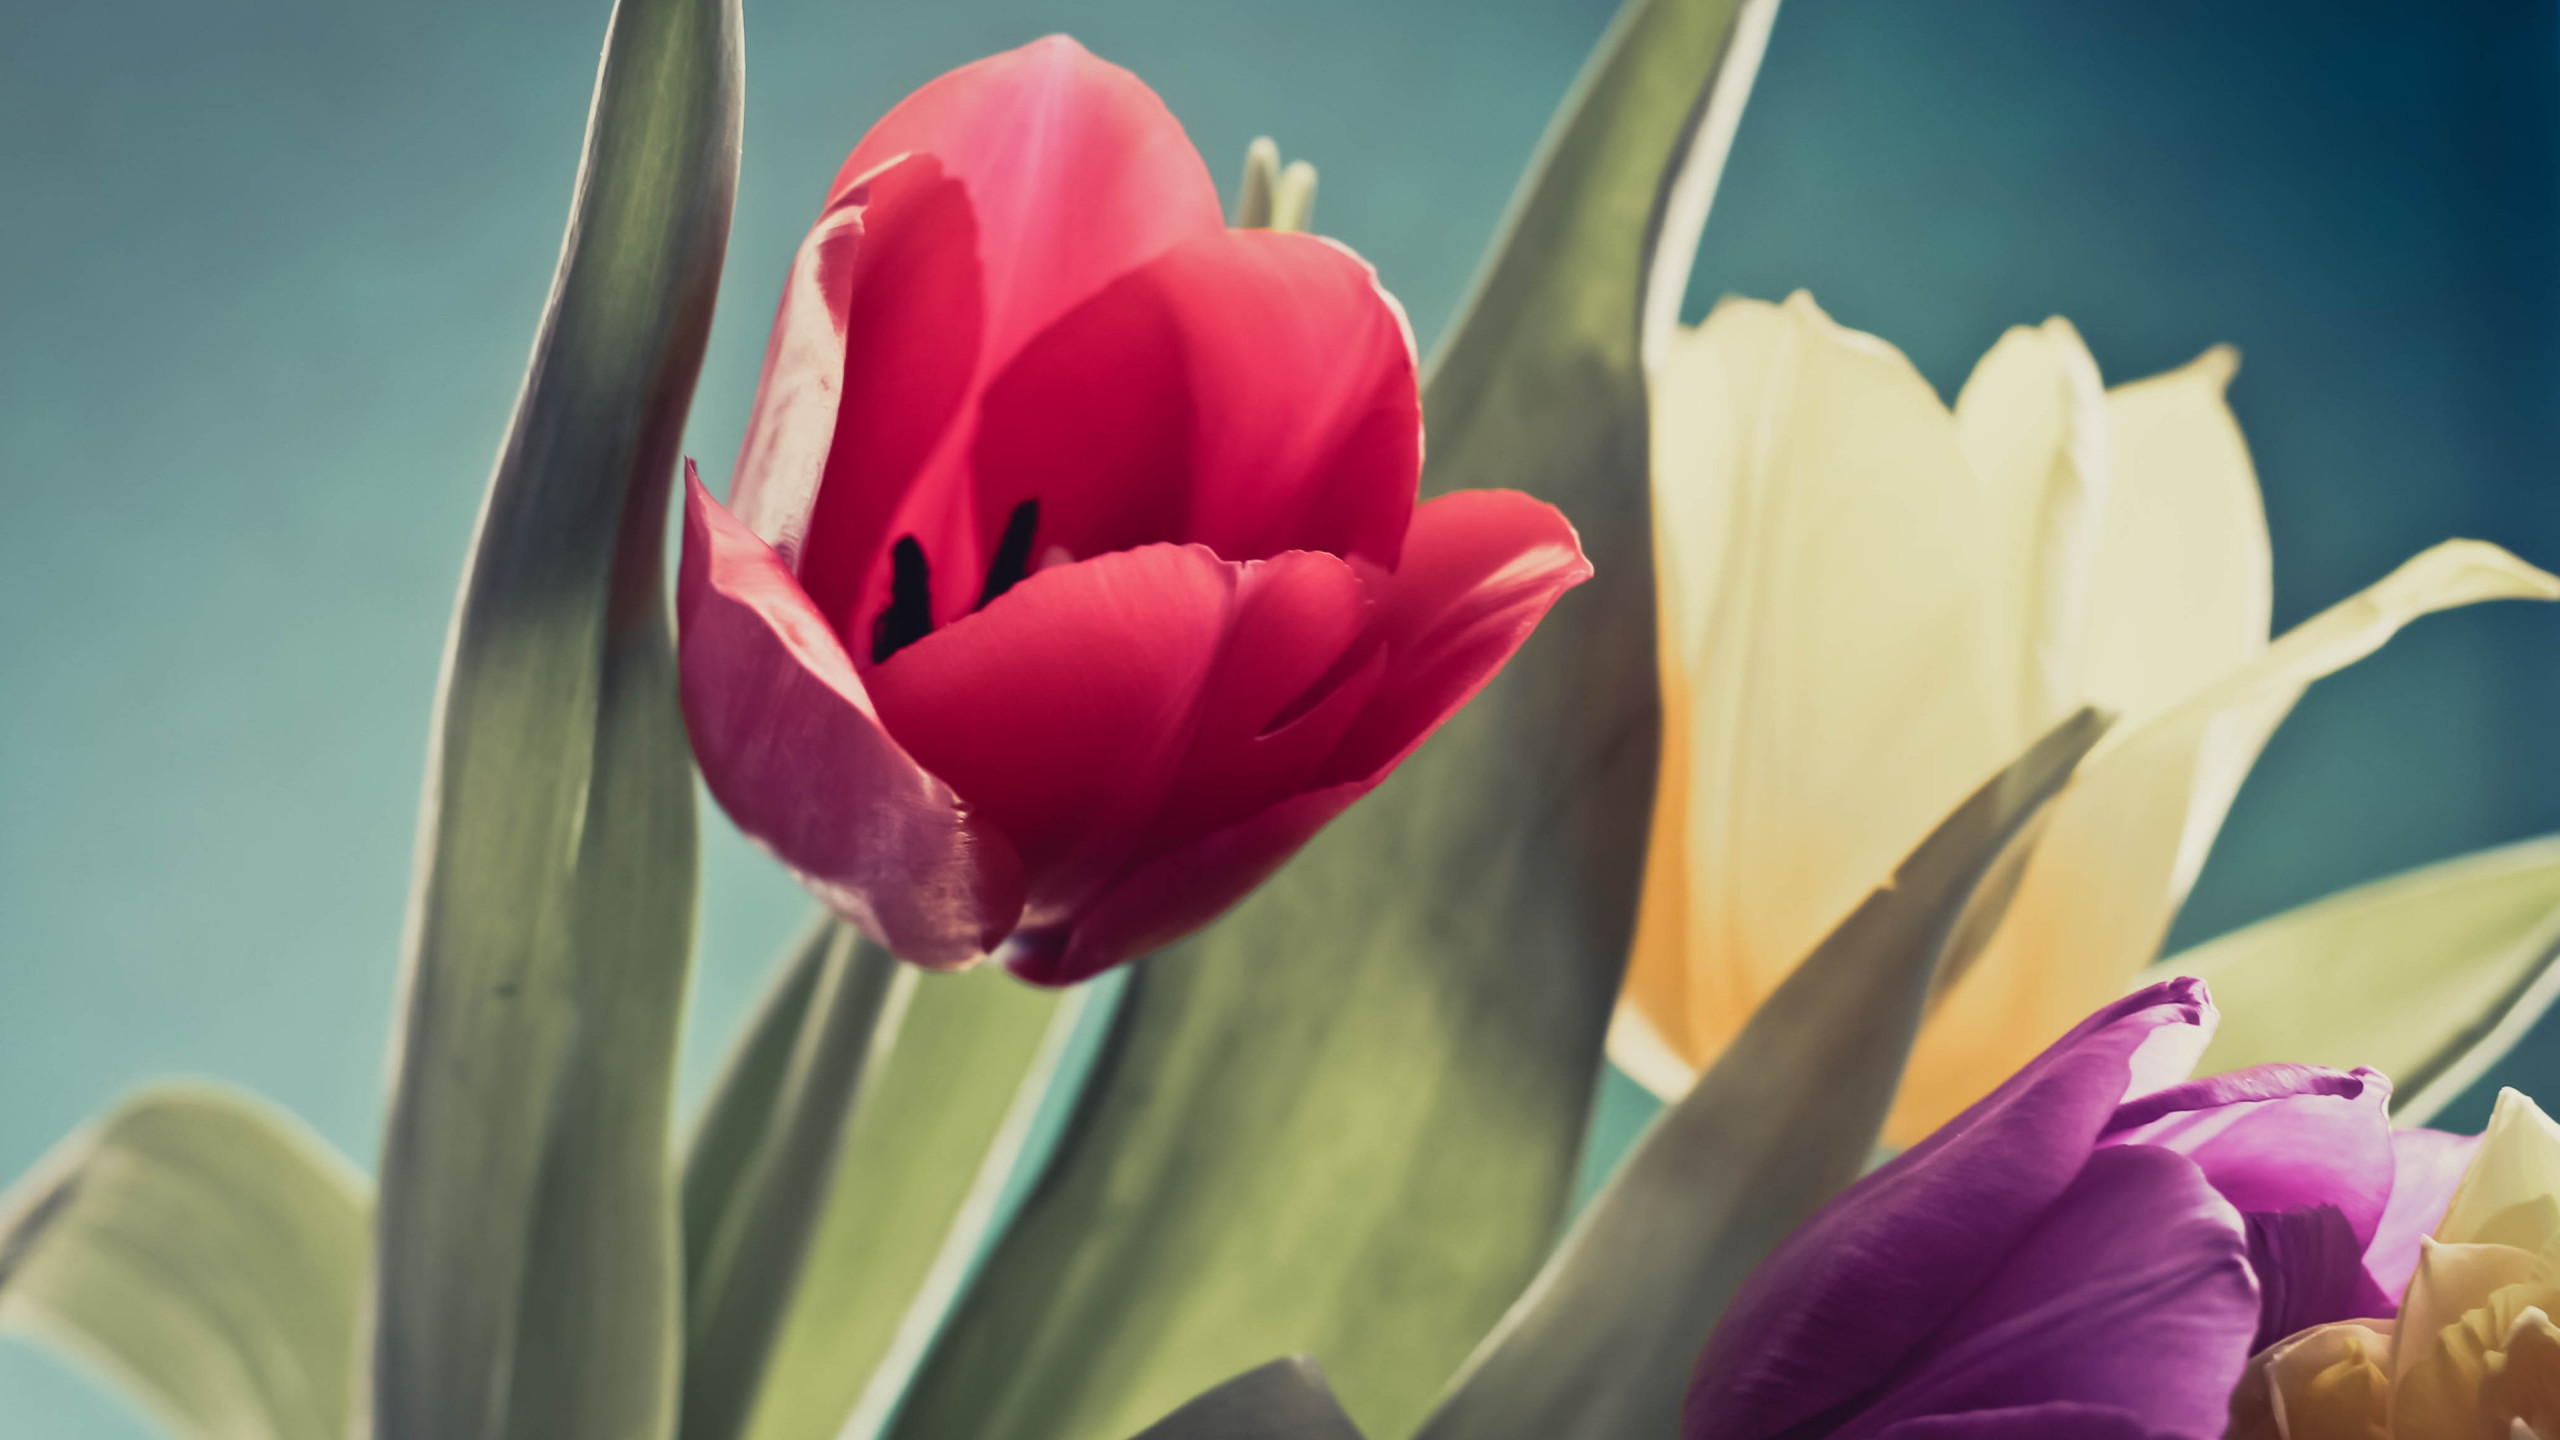 Red, purple and yellow tulips wallpaper 2560x1440